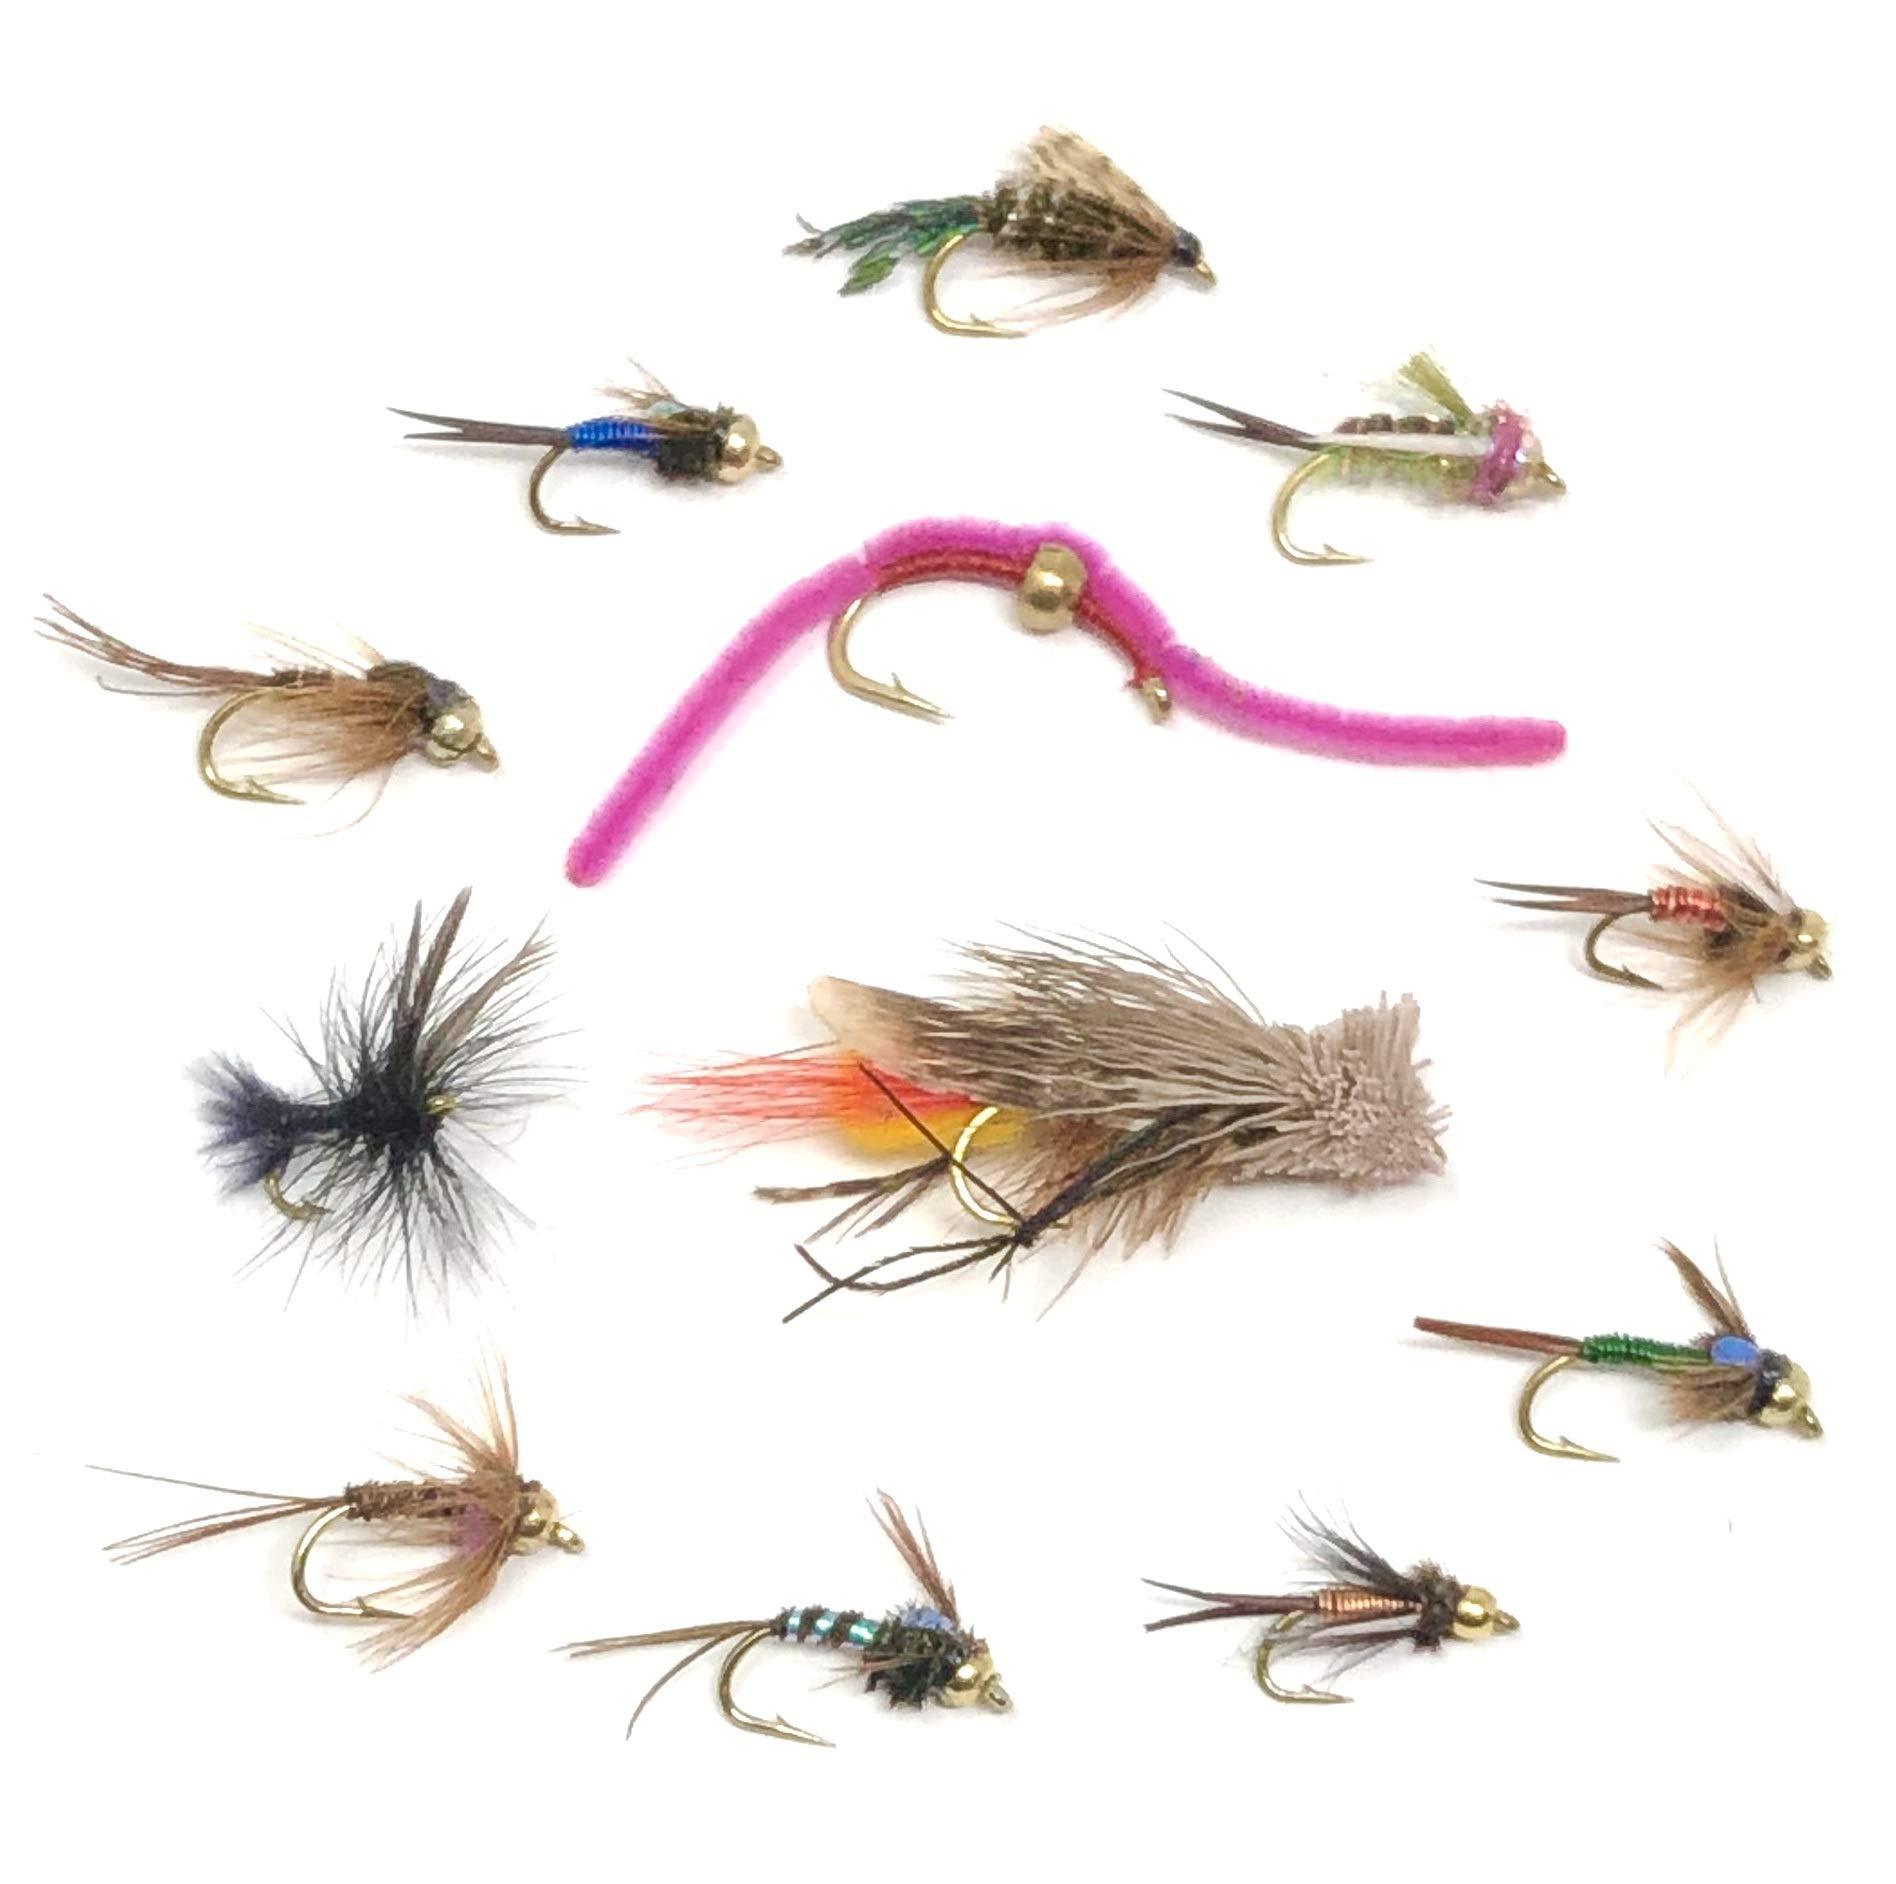 ODDSPRO Fly Fishing Flies Kit, Fly Fishing Lures, 36/78Pcs Fly Fishing Dry  Flies Wet Flies Assortment Kit with Waterproof Fly Box for Trout Fishing